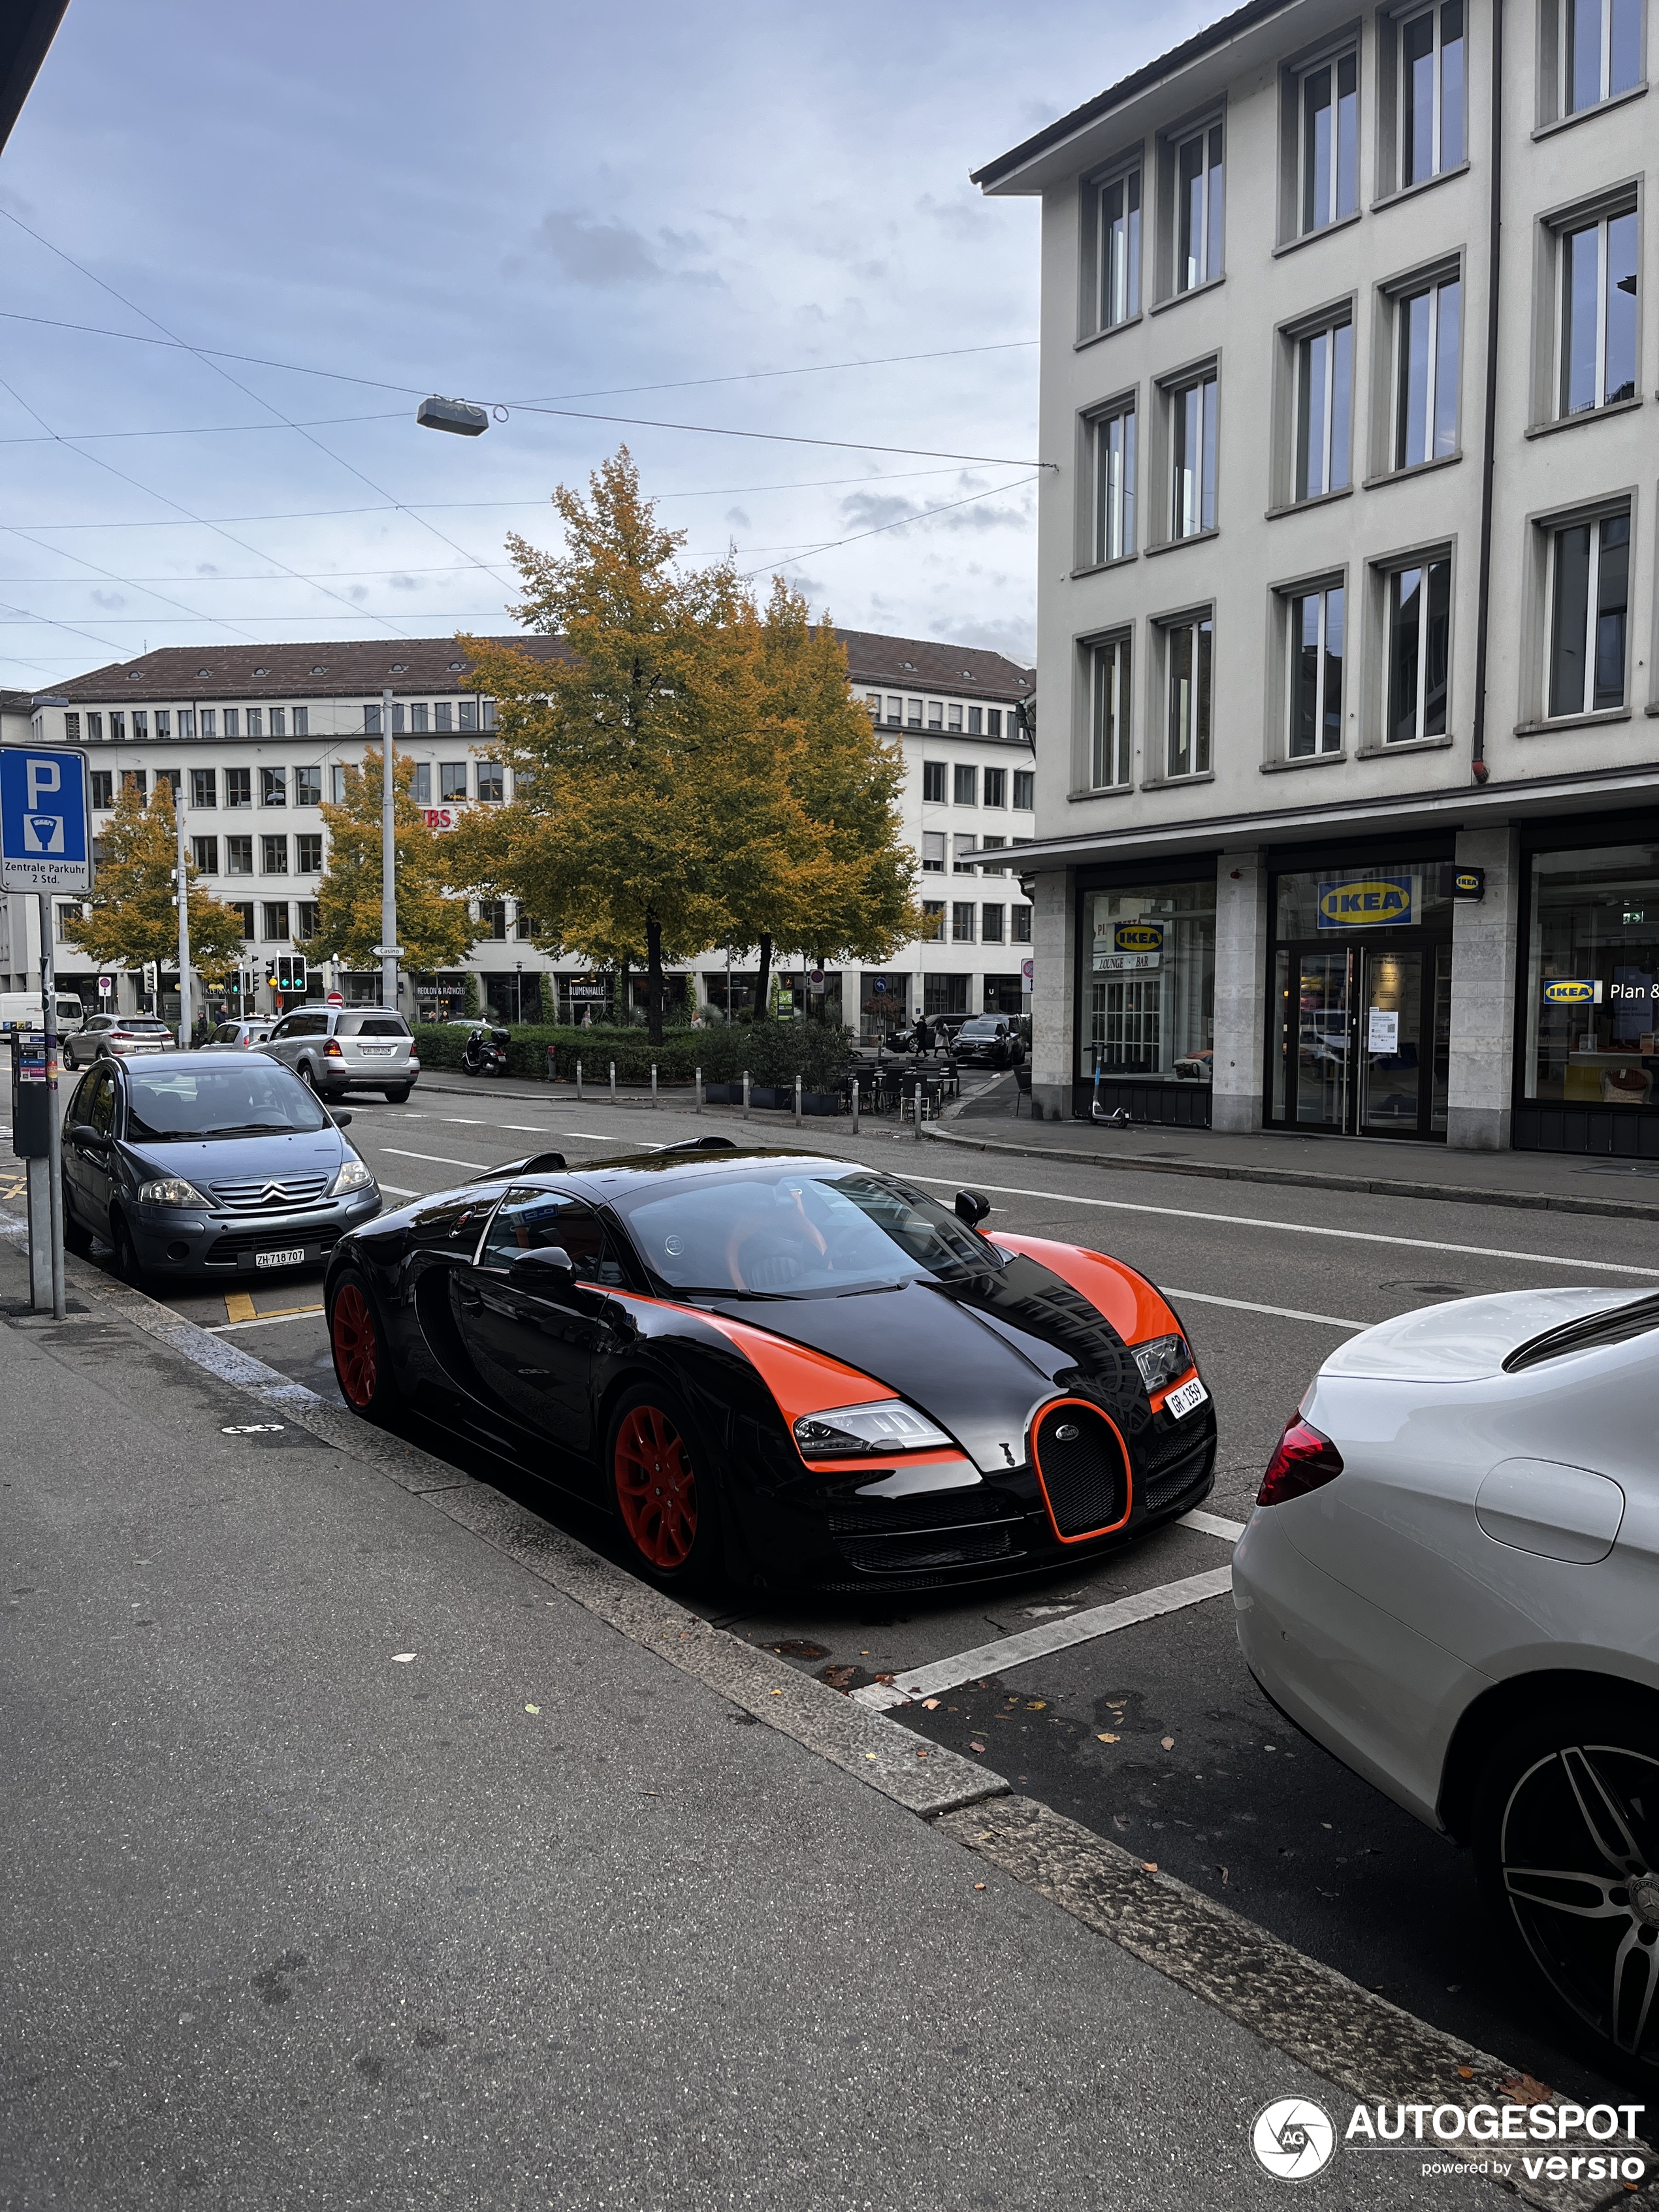 Another Bugatti Spotted in the City of Zurich